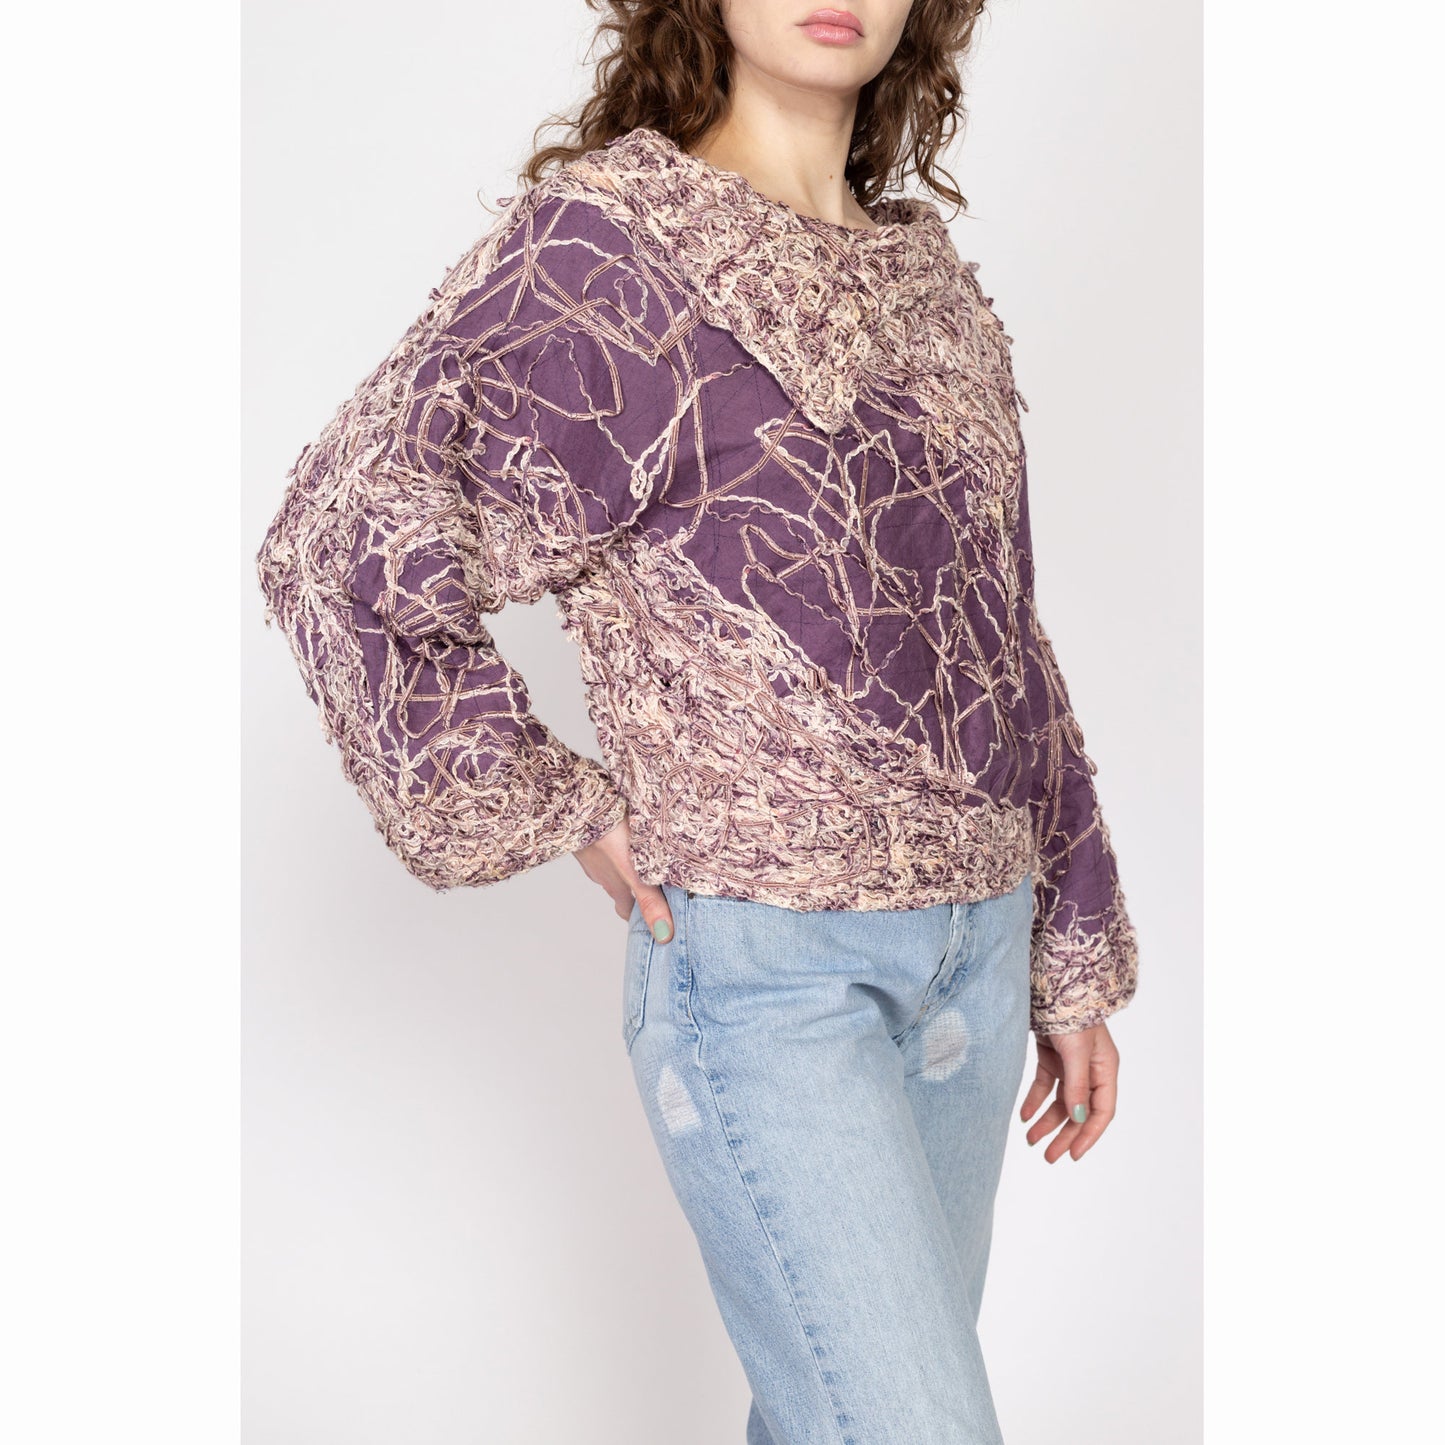 Large 90s Purple Abstract Textural Knit Sweater | Vintage Boho Two Tone Boatneck Slouchy Pullover